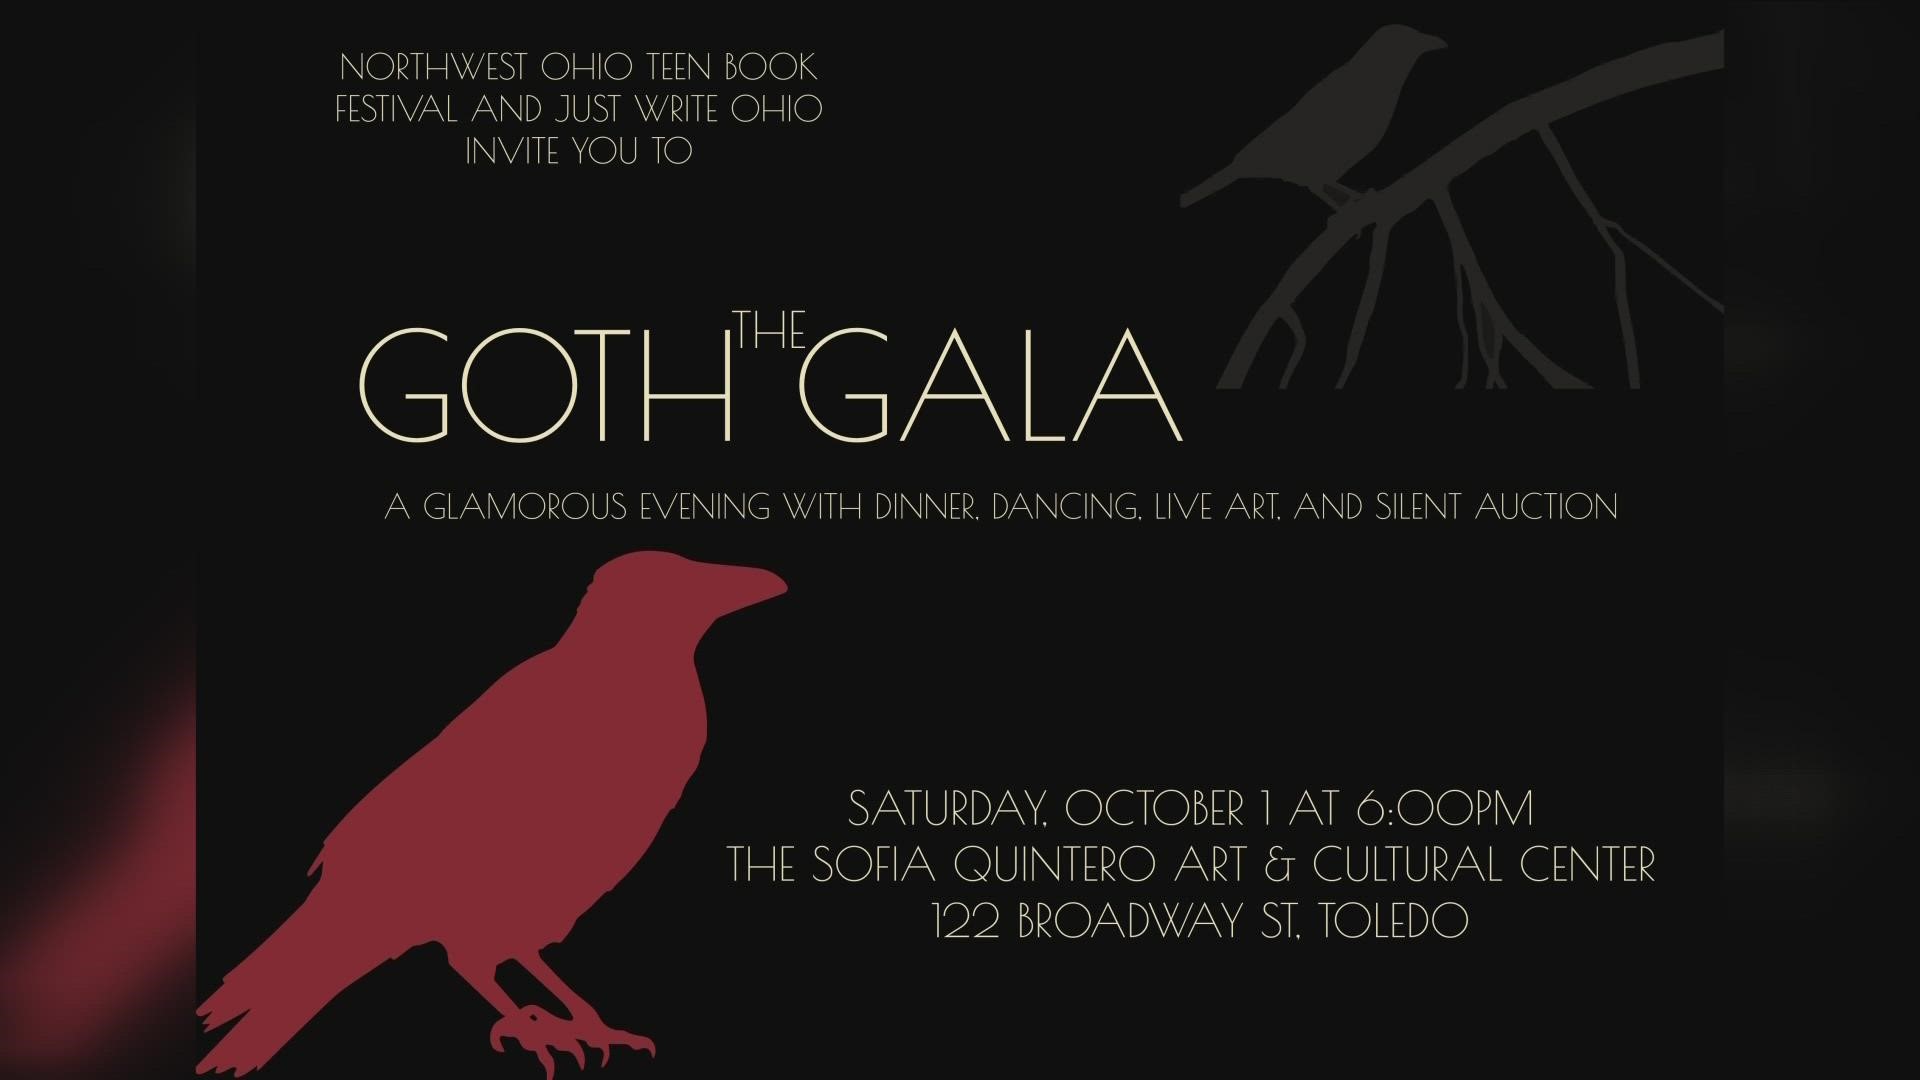 Denise Phillips, owner of Perrysburg bookshop Gathering Volumes, joins WTOL 11 to chat about the “Goth Gala” event happening next weekend.